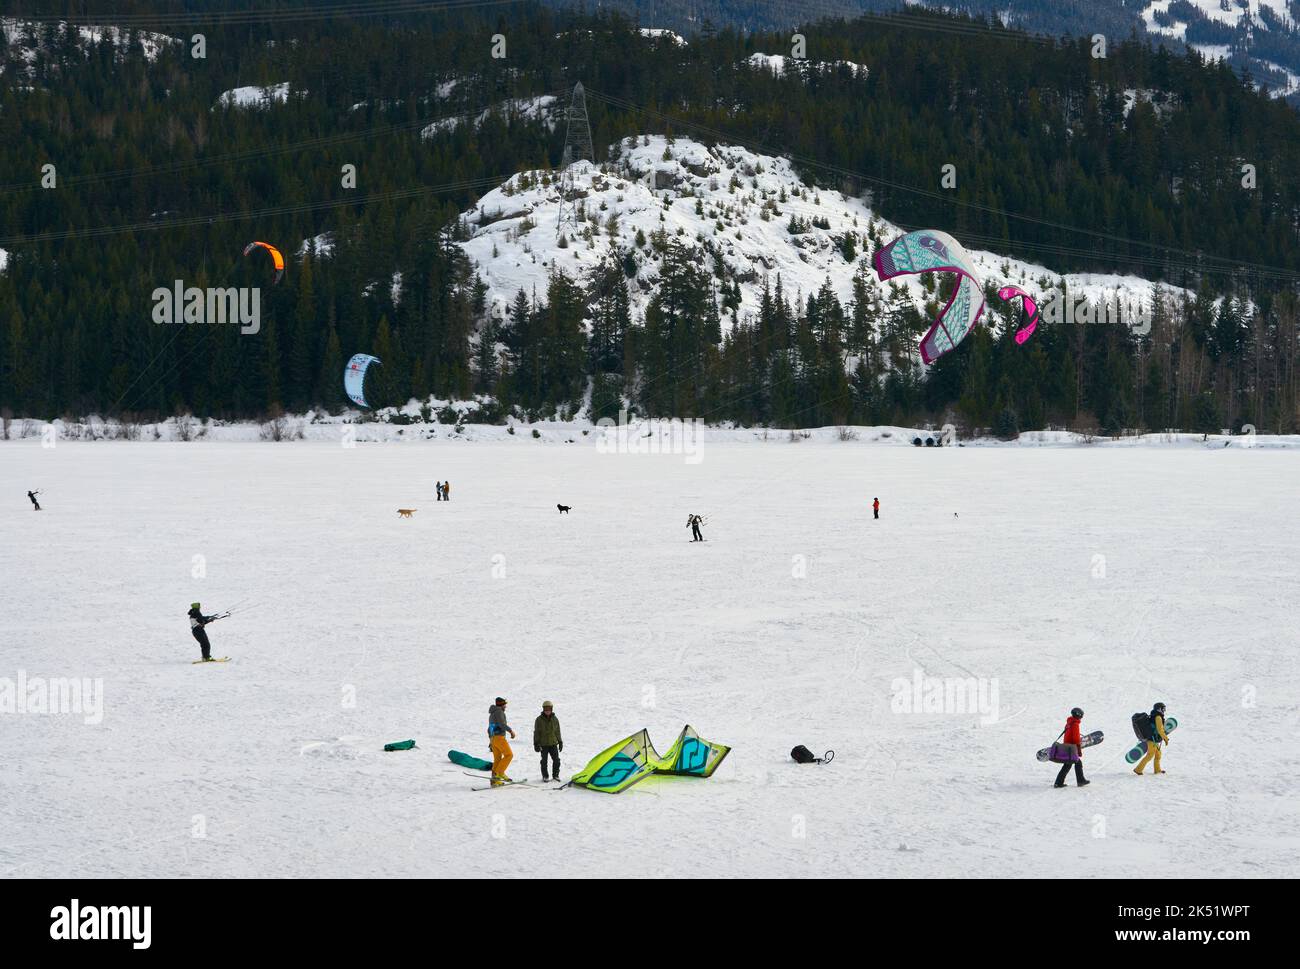 Whistler, British Columbia, Canada – March 2, 2019. Snow Kiting on Green Lake Whistler. Snow kiters on a windy day on frozen Green Lake in Whistler, B Stock Photo